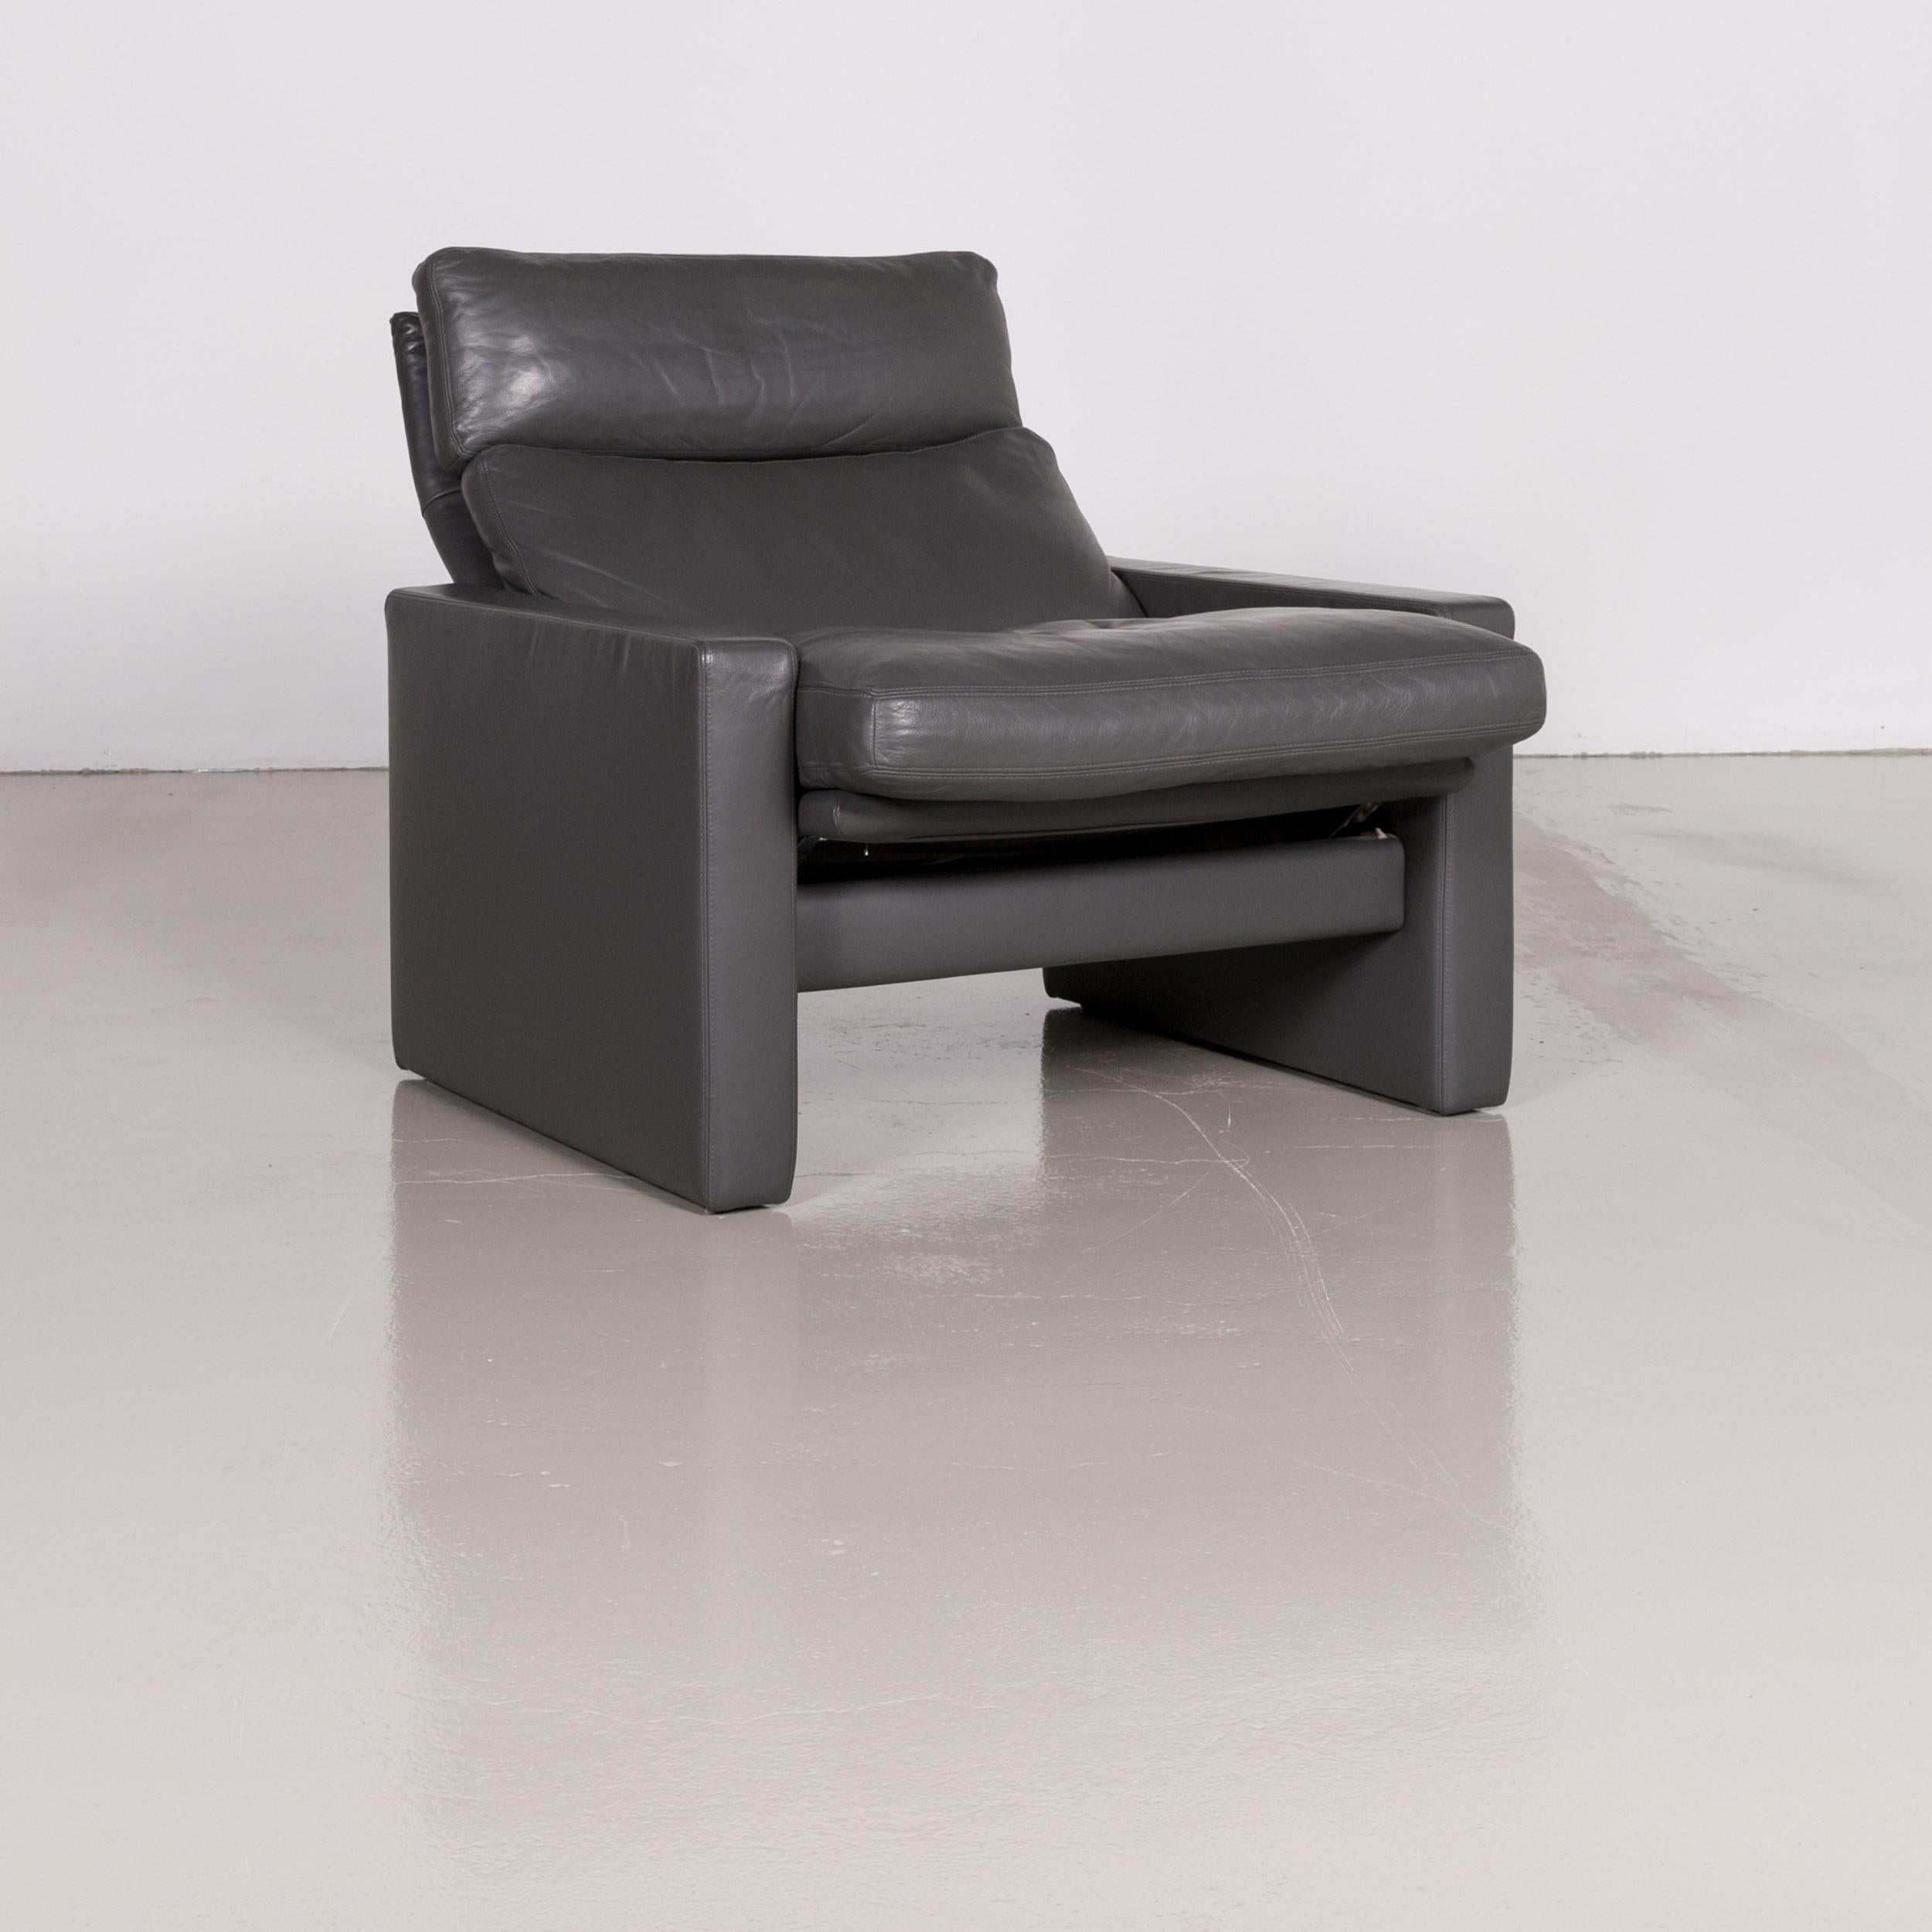 Erpo Manhattan Designer Armchair Leather Grey Anthracite One Seat Function In Good Condition For Sale In Cologne, DE